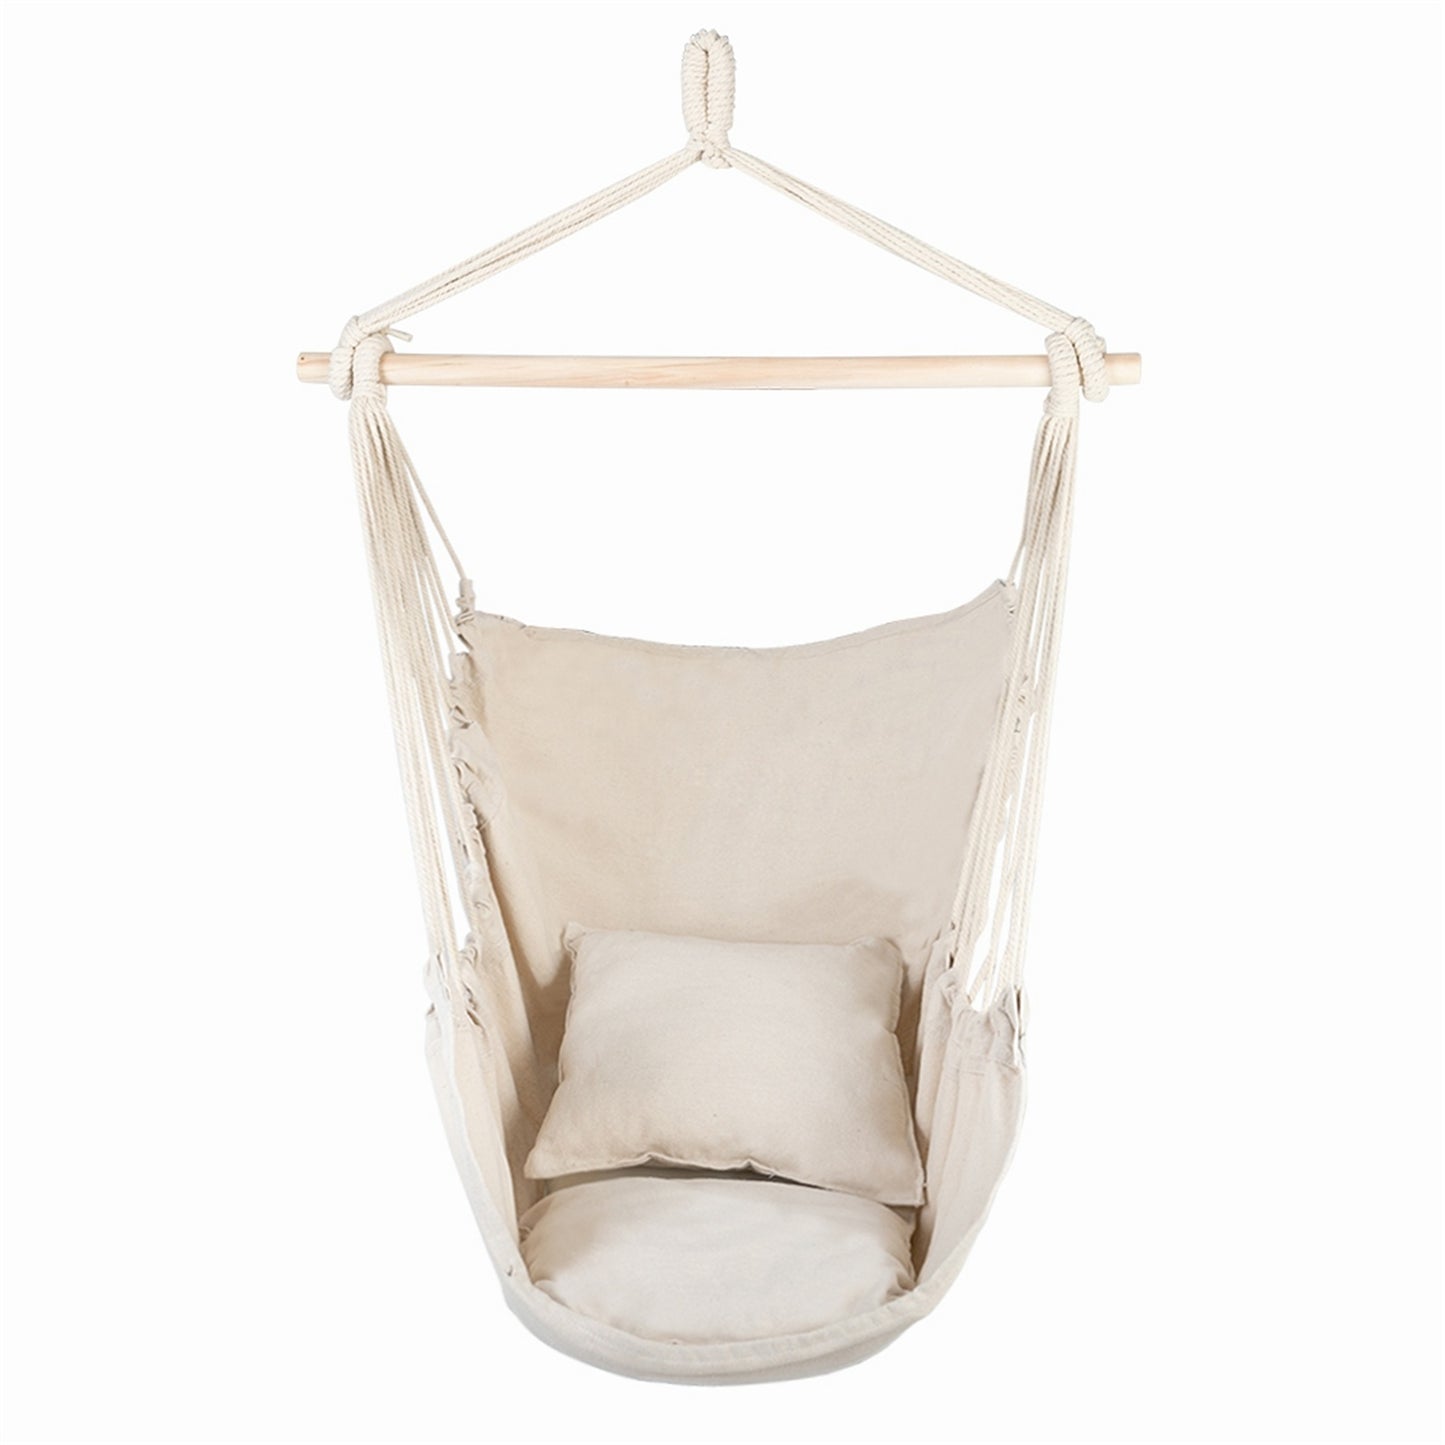 Hammock Chair Distinctive Cotton Canvas Hanging Rope Chair